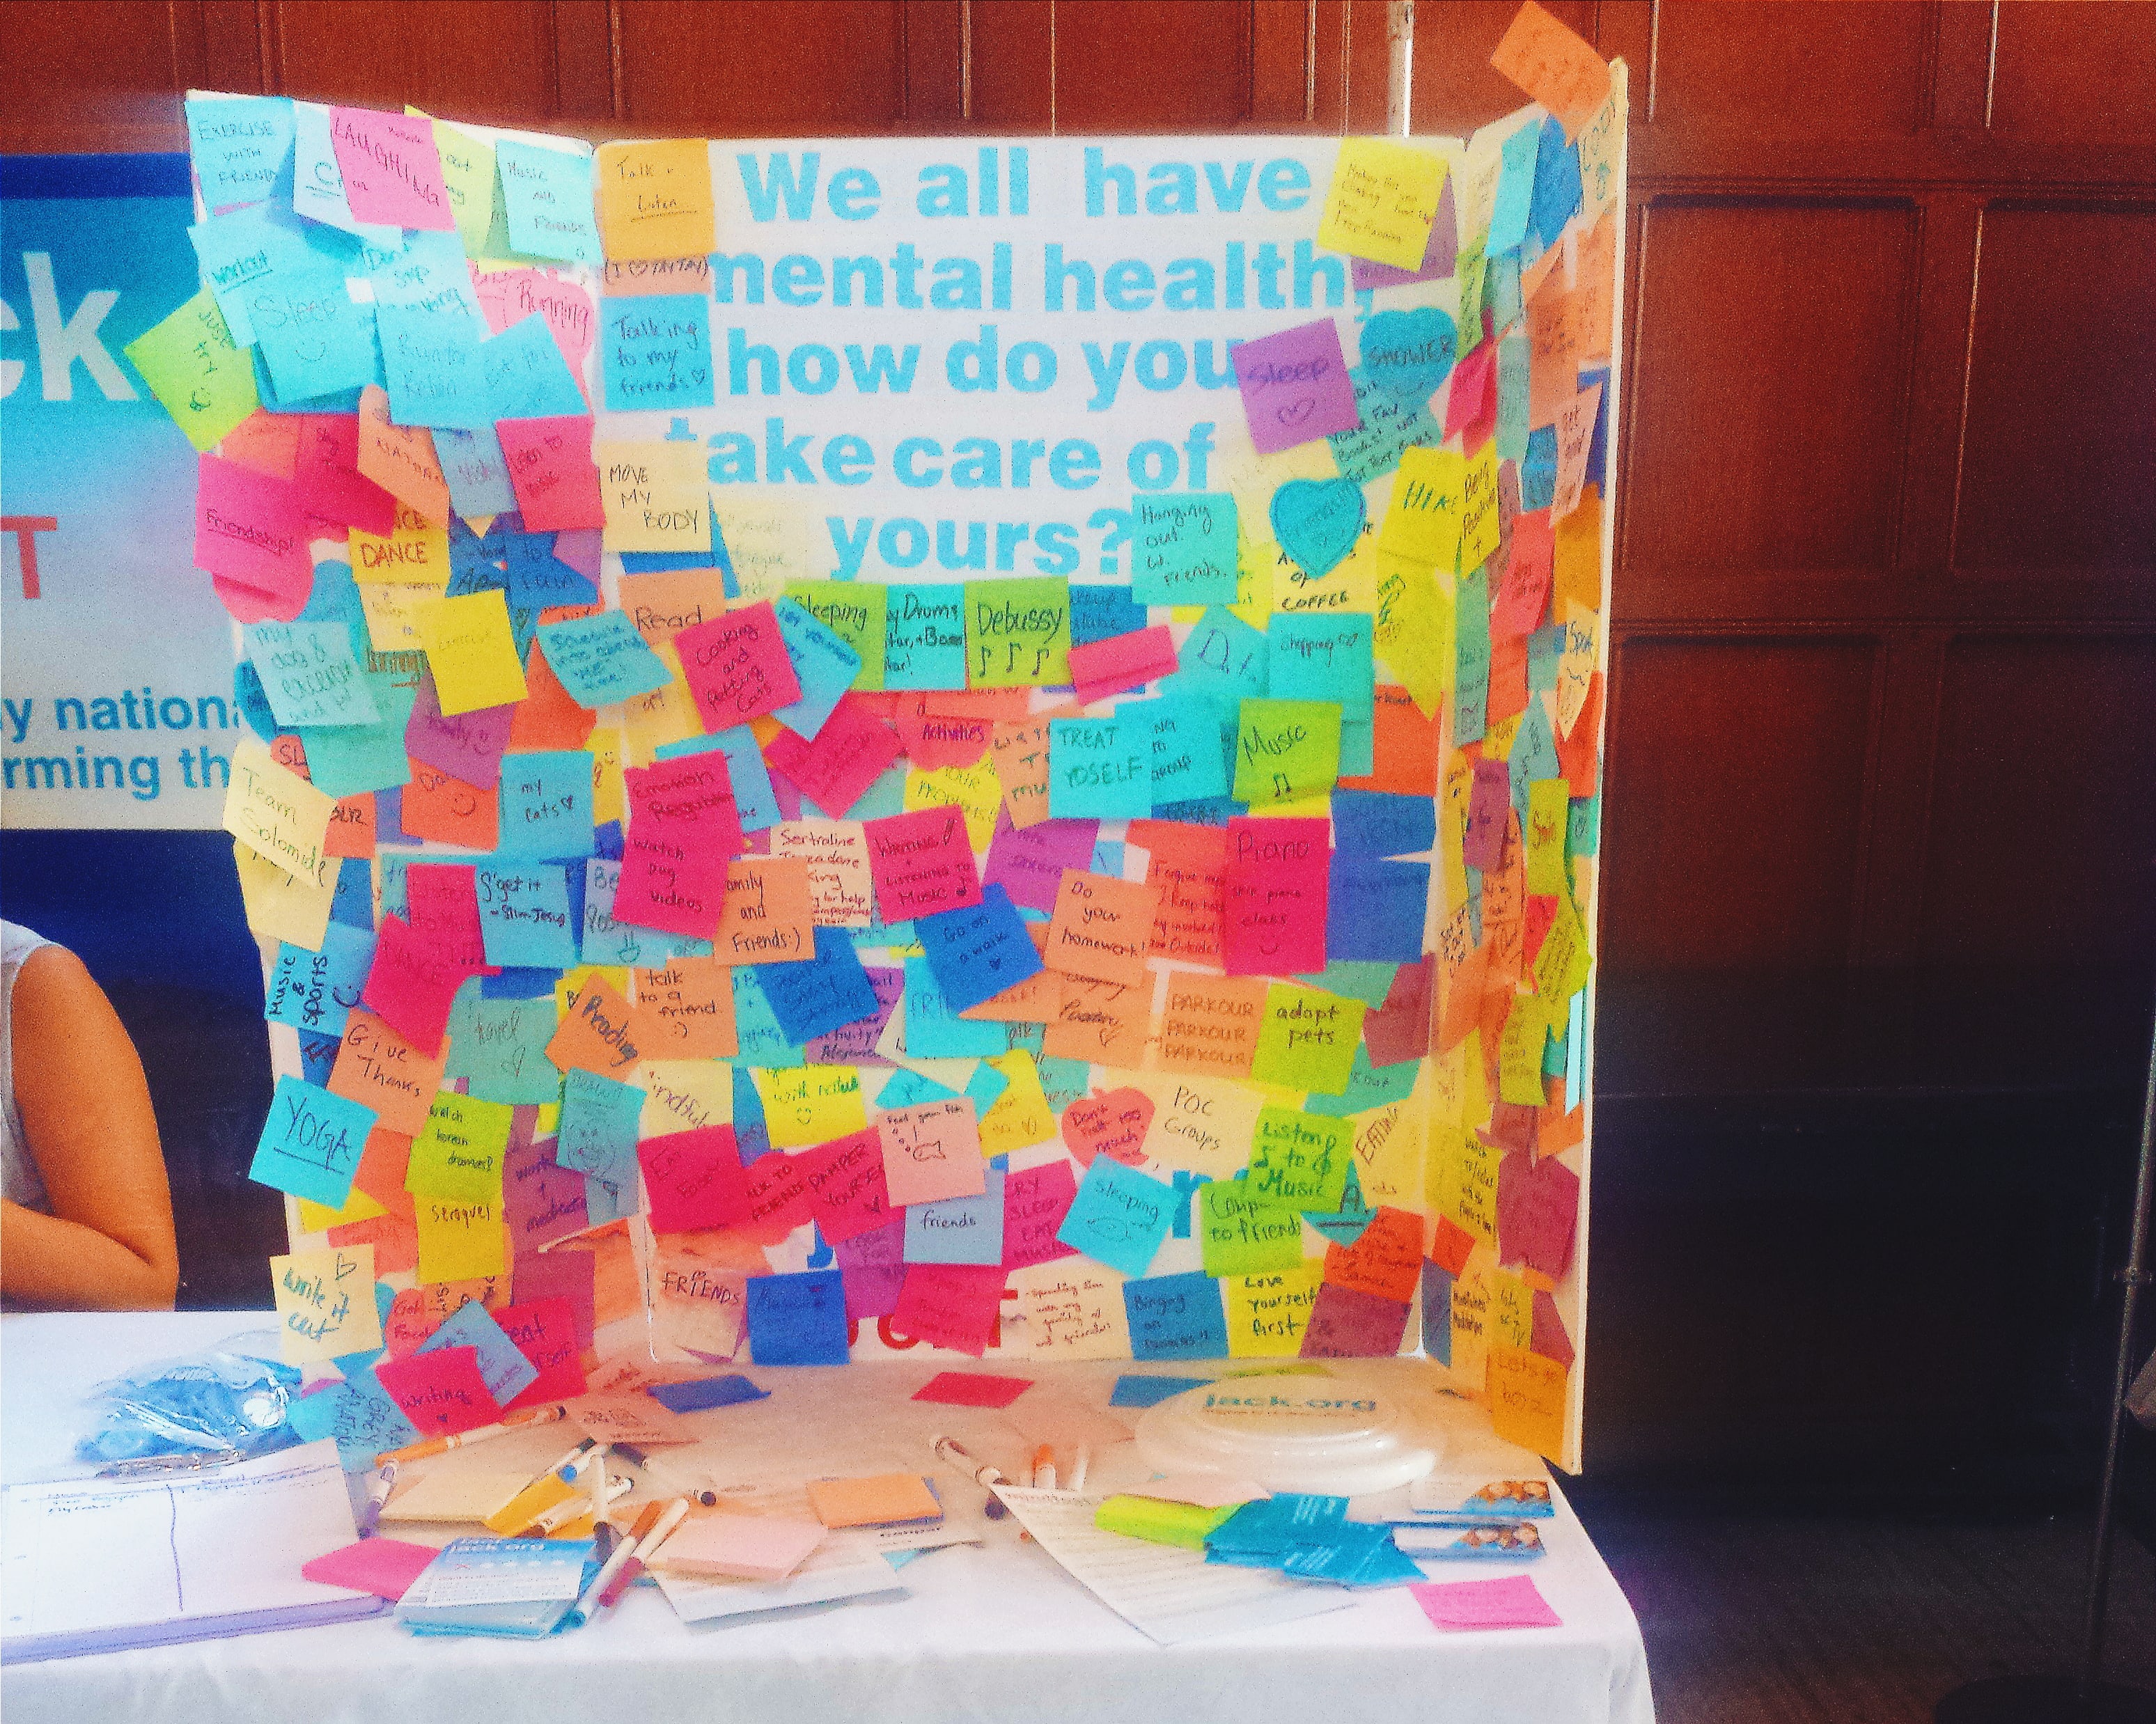 A tri-fold bristol board with the question "We all have mental health. How do you take care of yours?" with sticky note responses all over written by students.